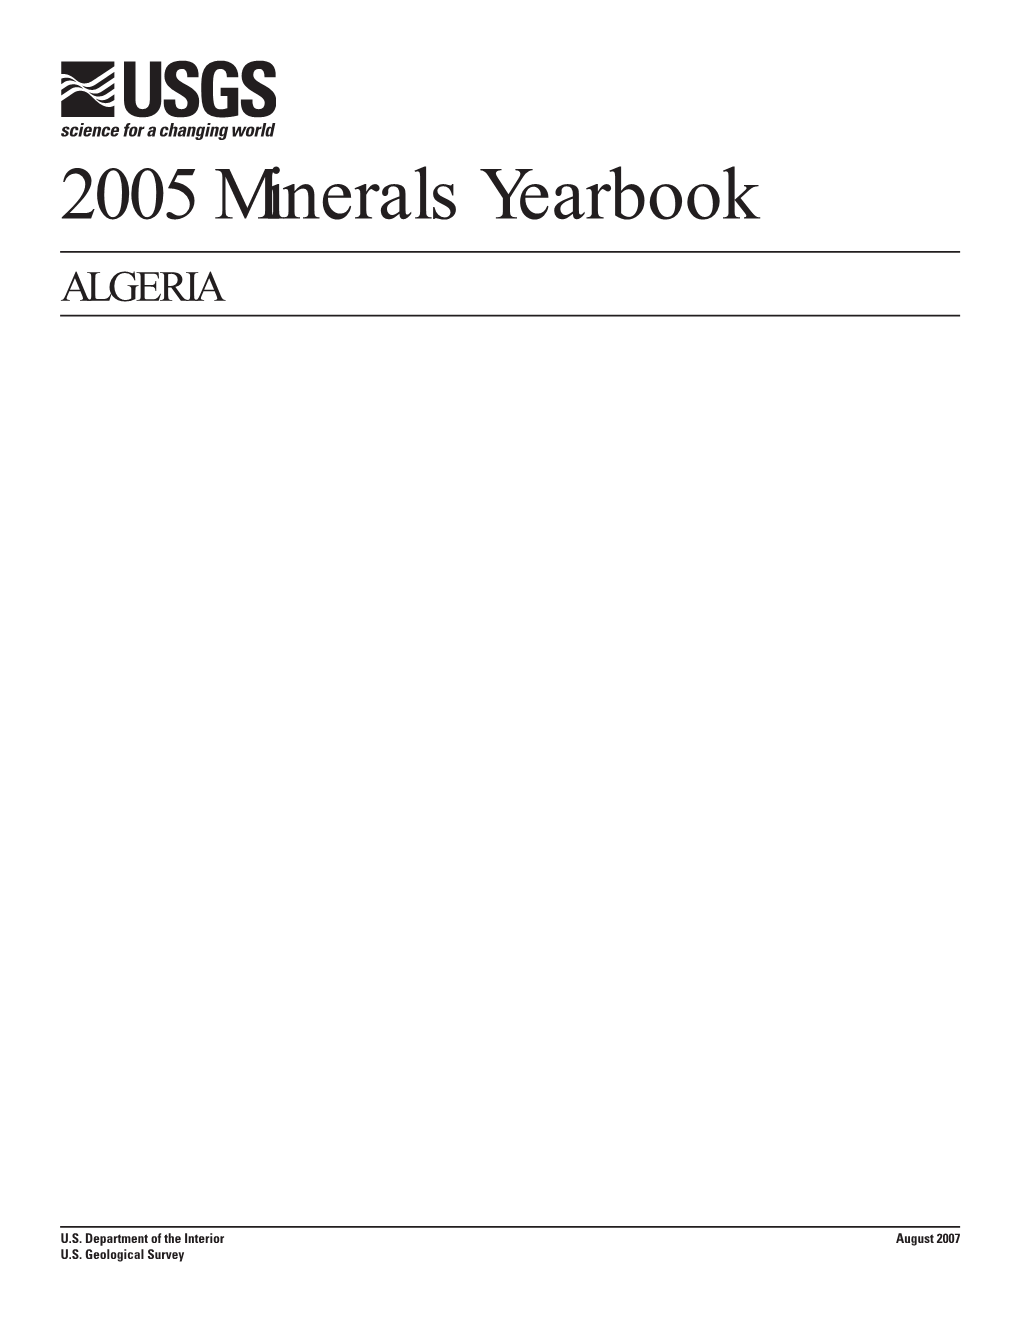 The Mineral Industry of Algeria in 2005